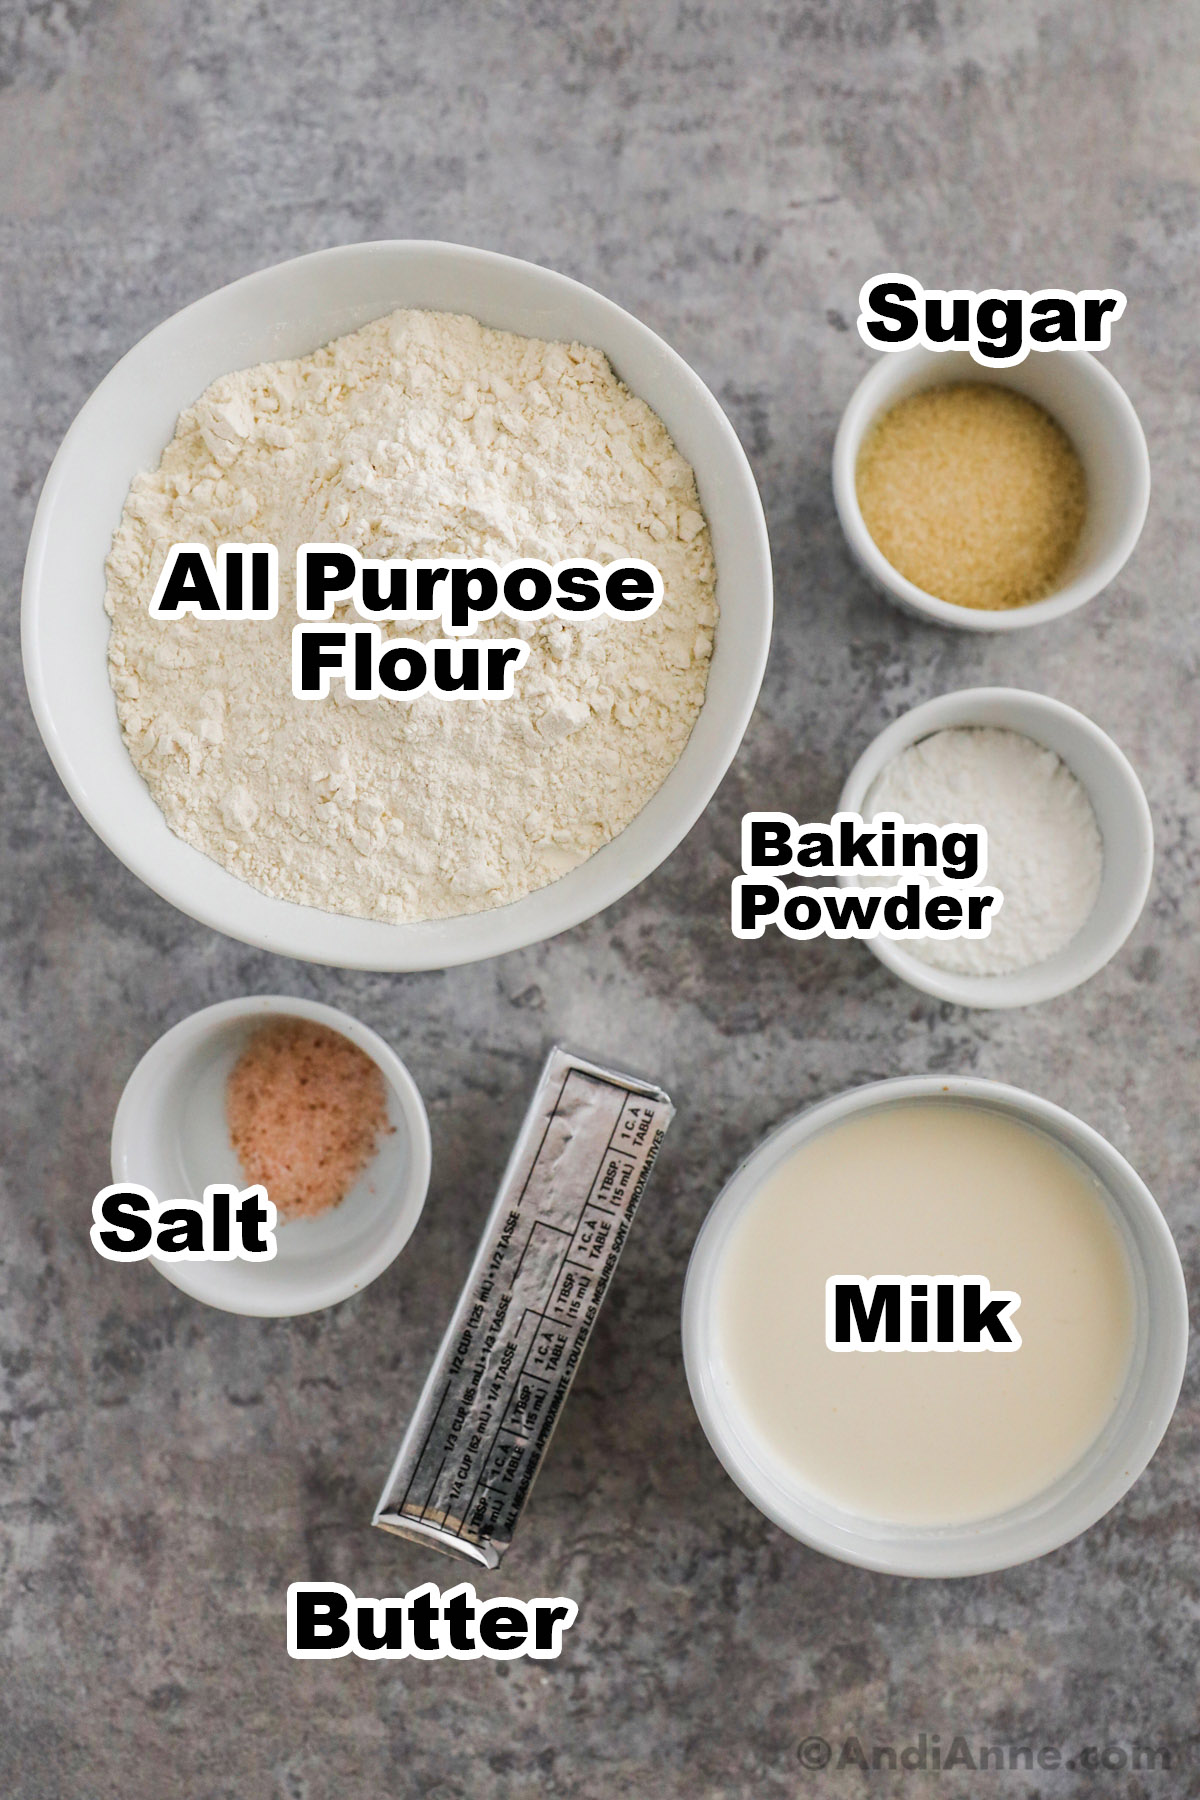 Recipe ingredients on counter including bowl of all purpose flour, bowls of sugar, baking powder, salt, milk and a stick of butter.